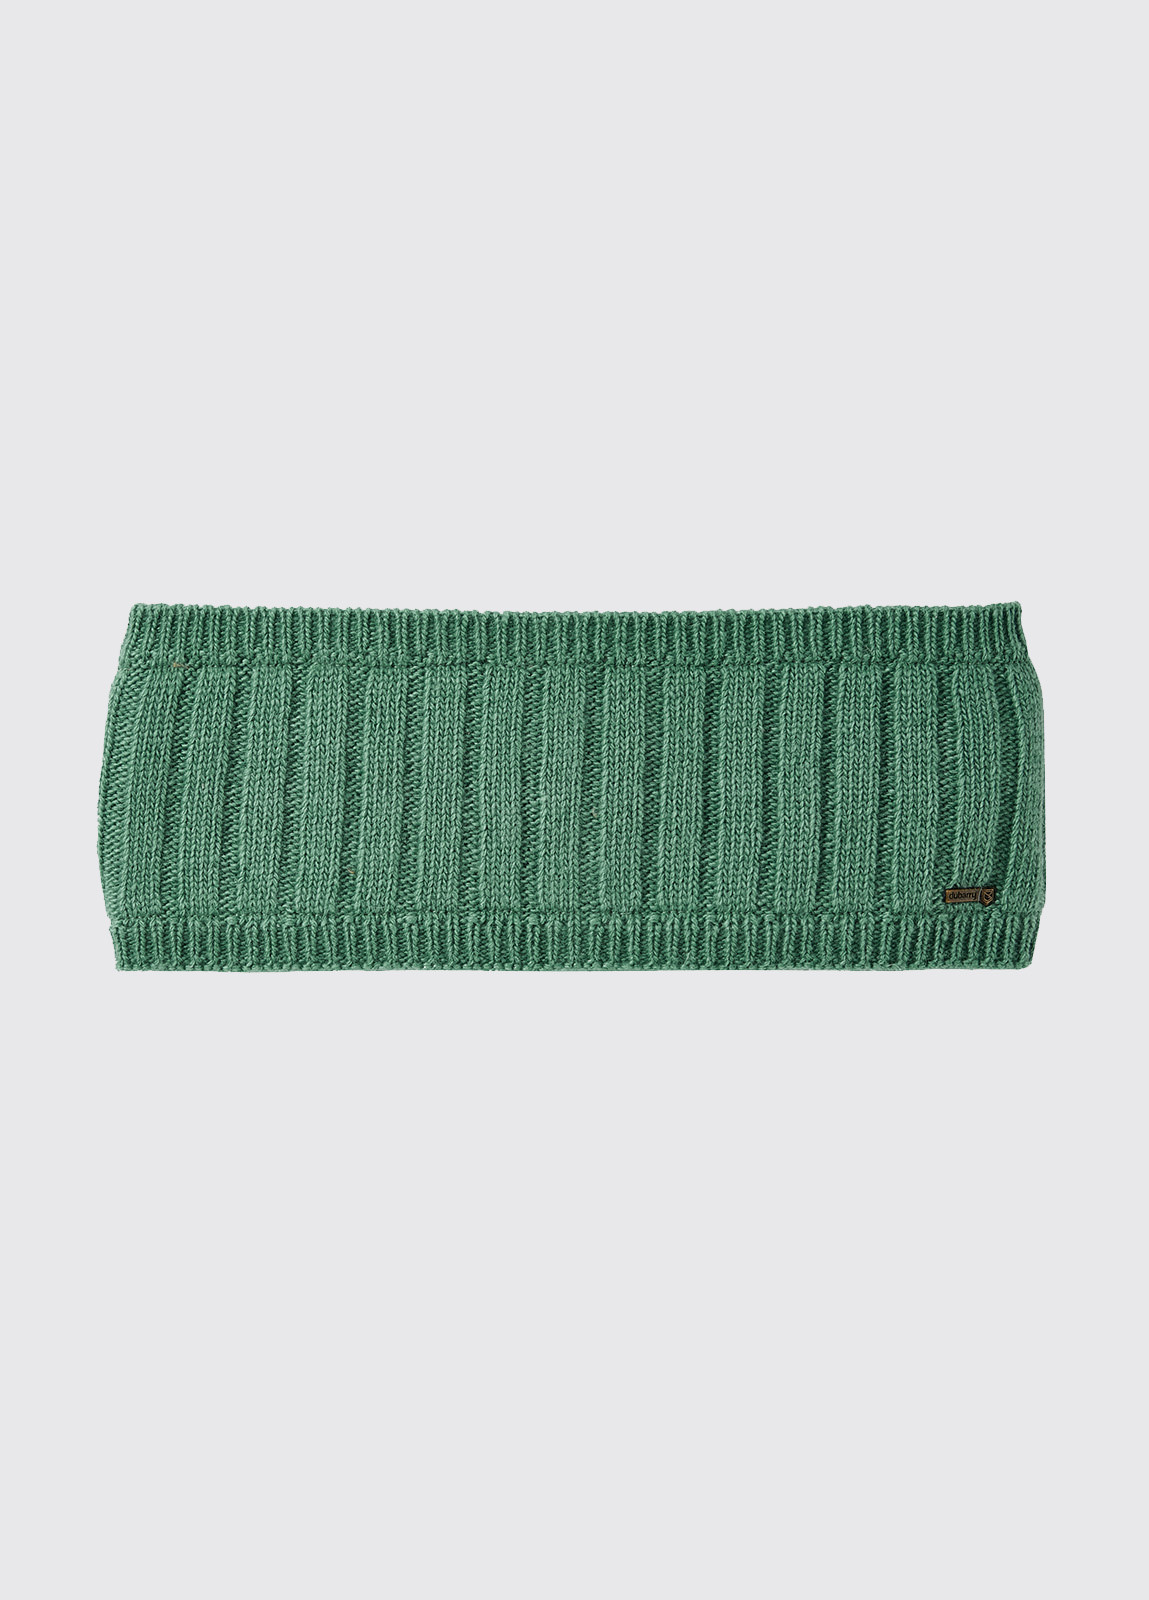 Mohill Knitted Headband - Crab Apple